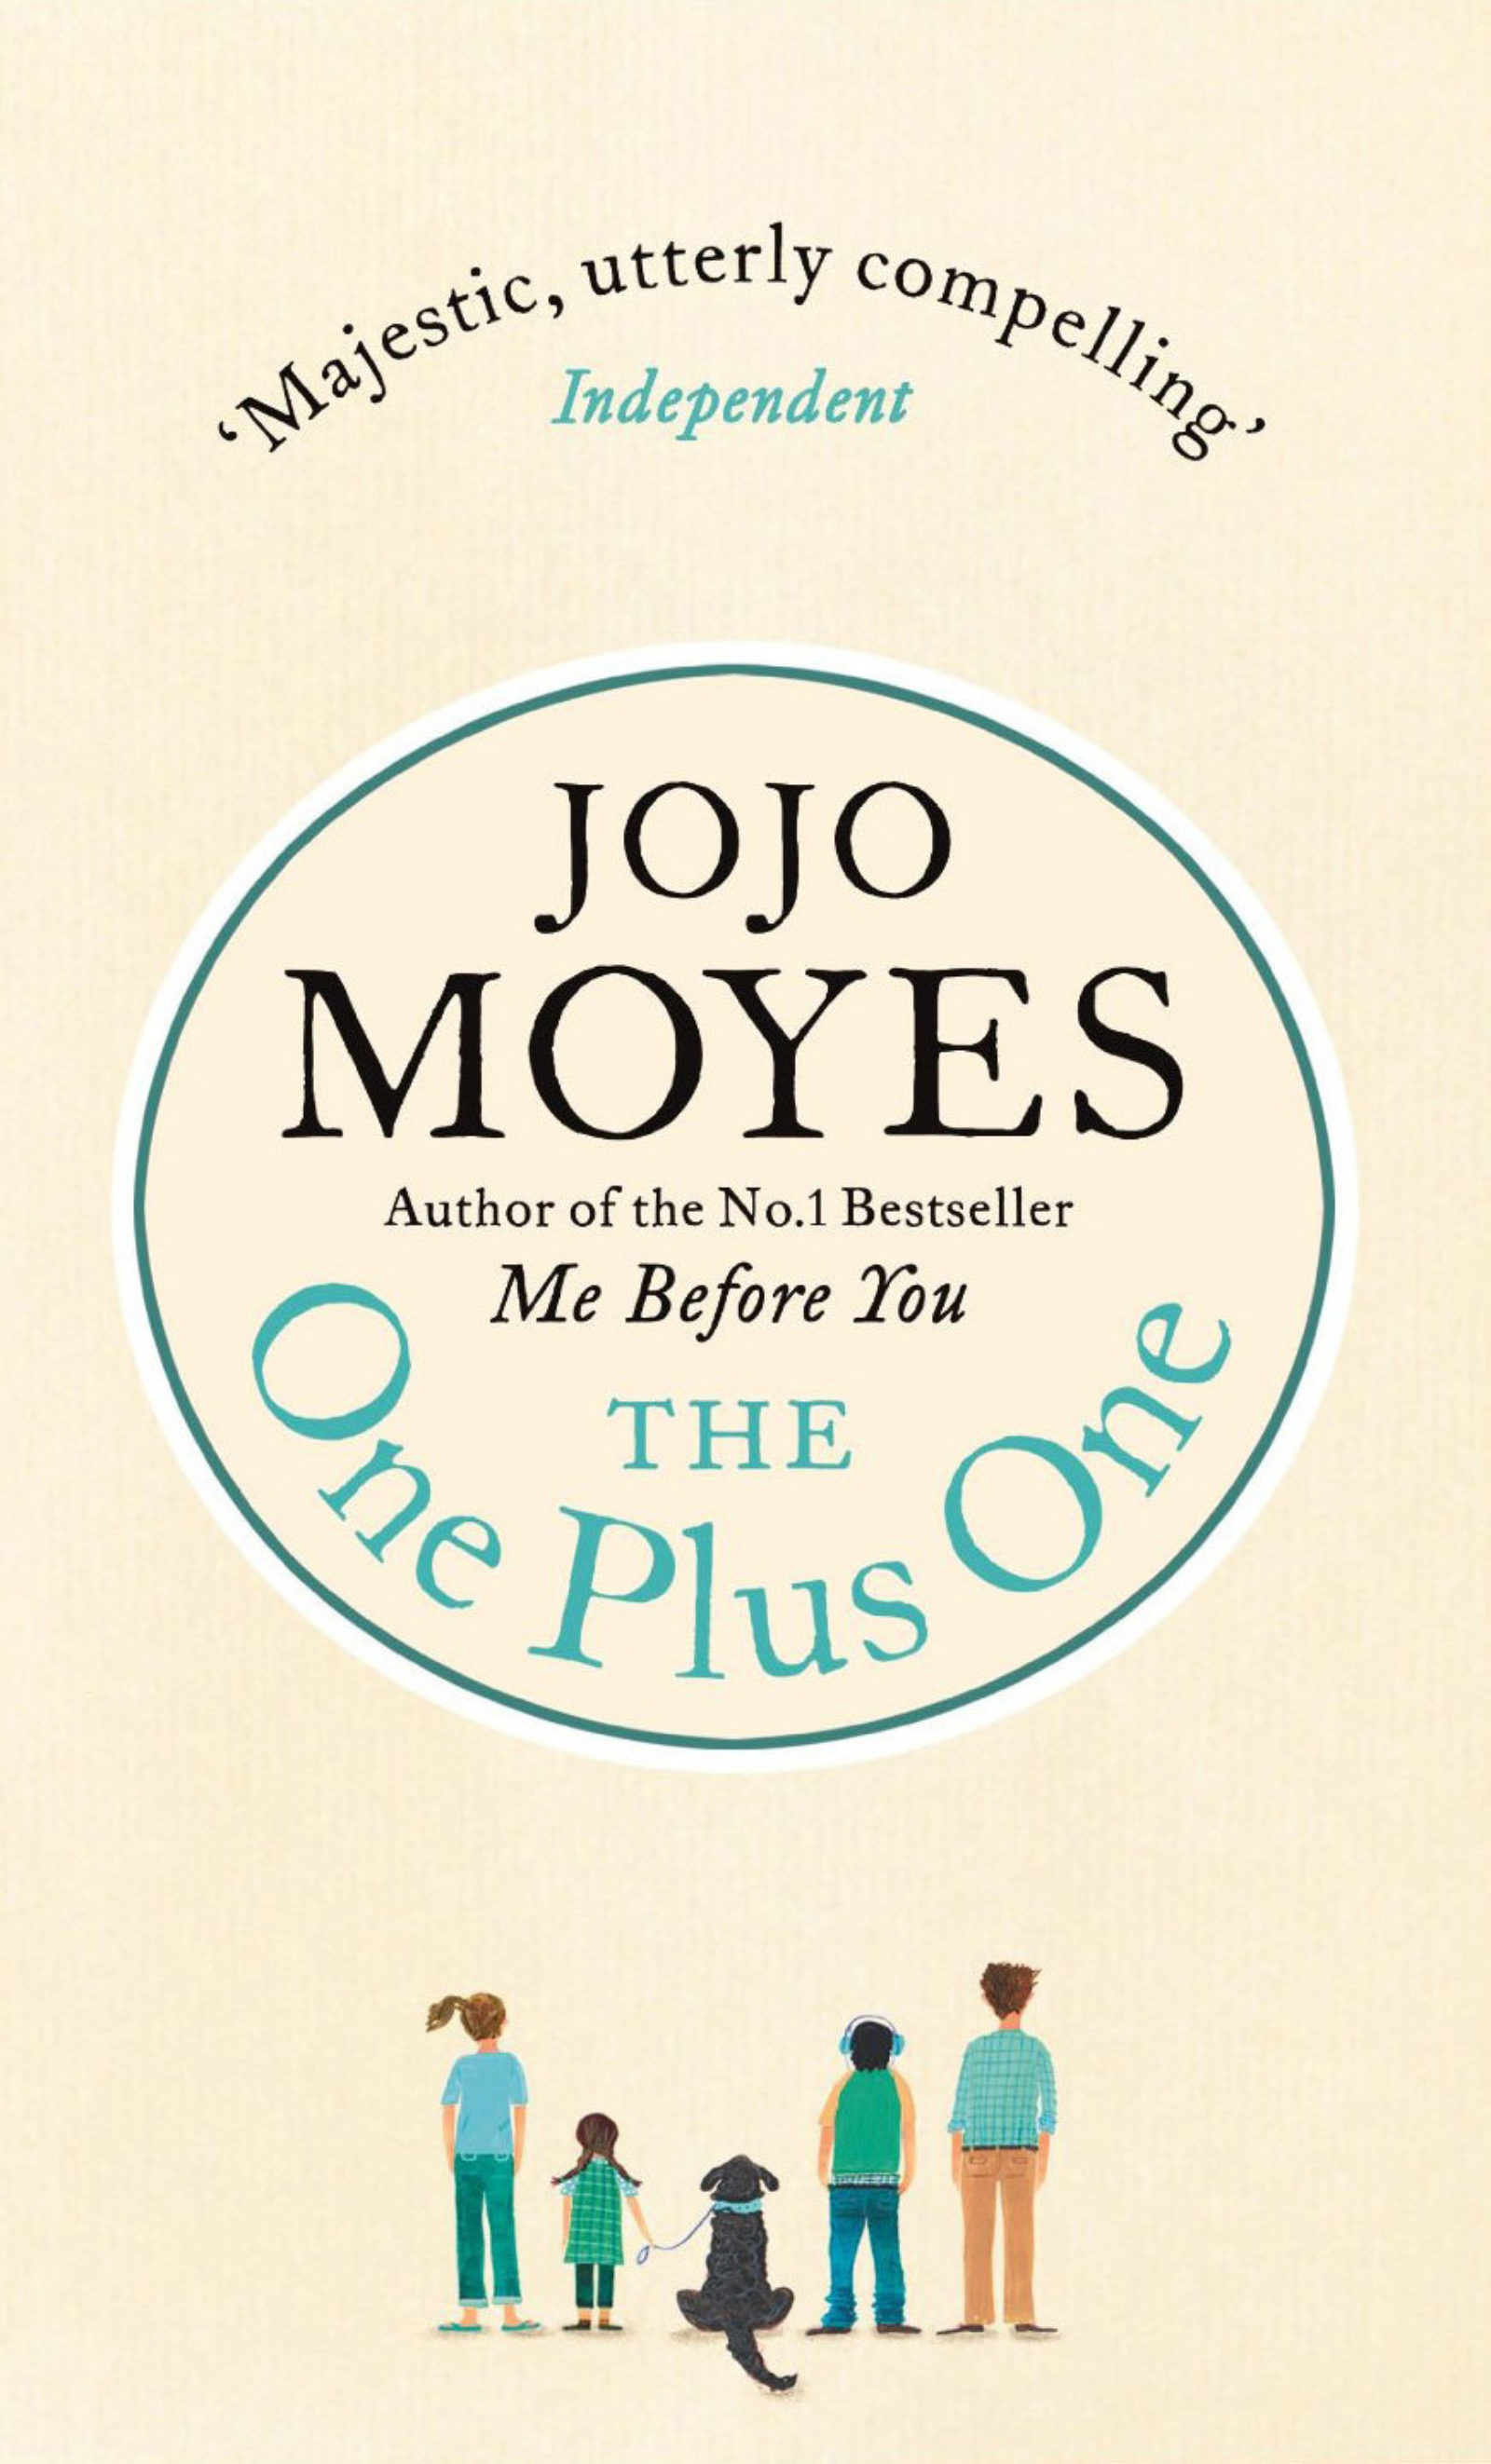 The One Plus One by Jojo Moyes